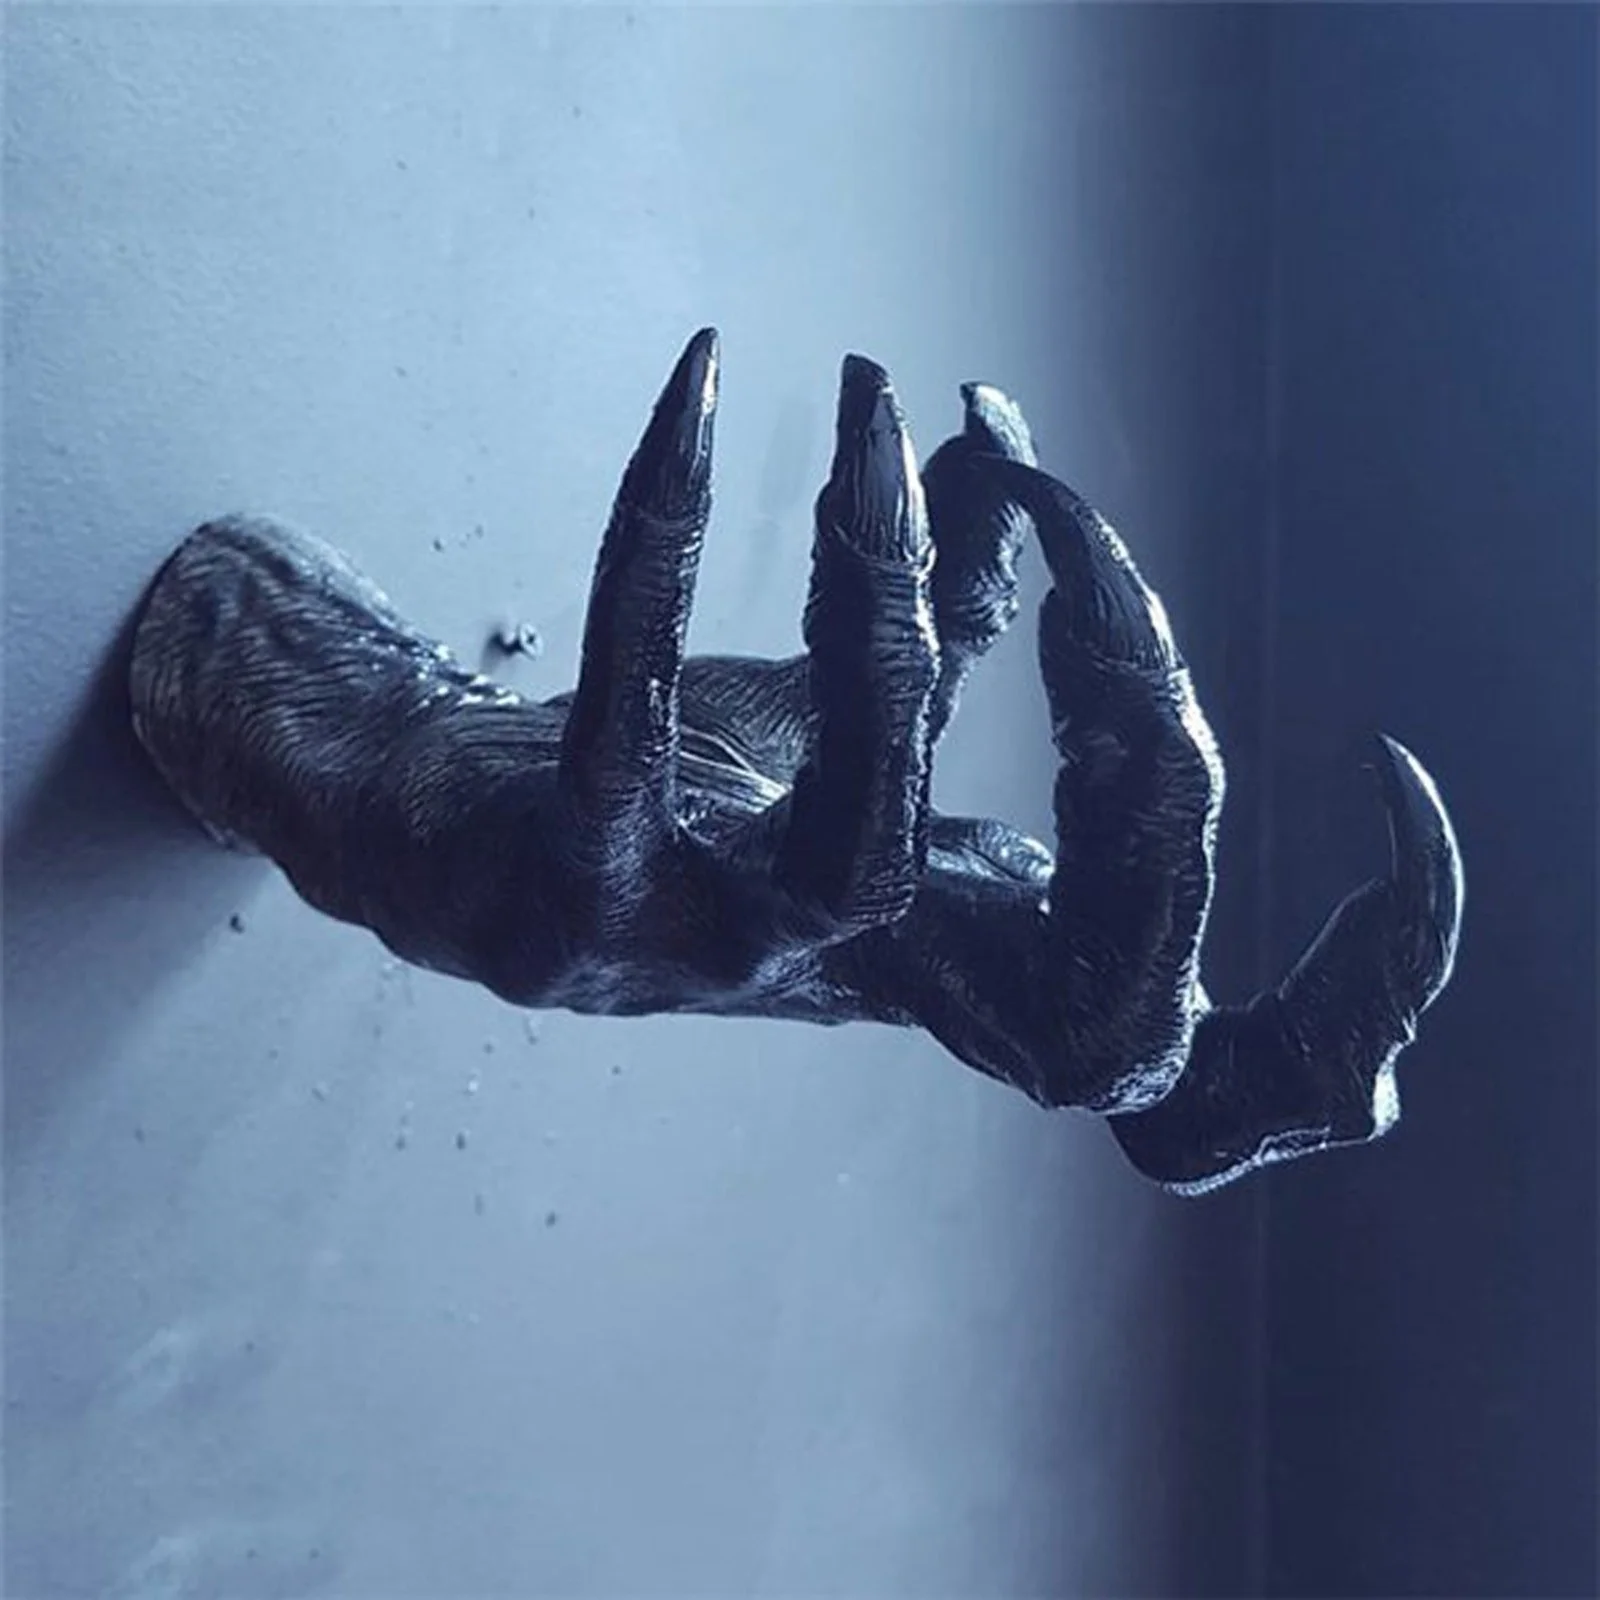 

Witch's Hand Wall Hanging Statues Aesthetic Art Sculpture Resin Retro Wall Witch Hand Ornament Home Creative Wall Decor #t2g